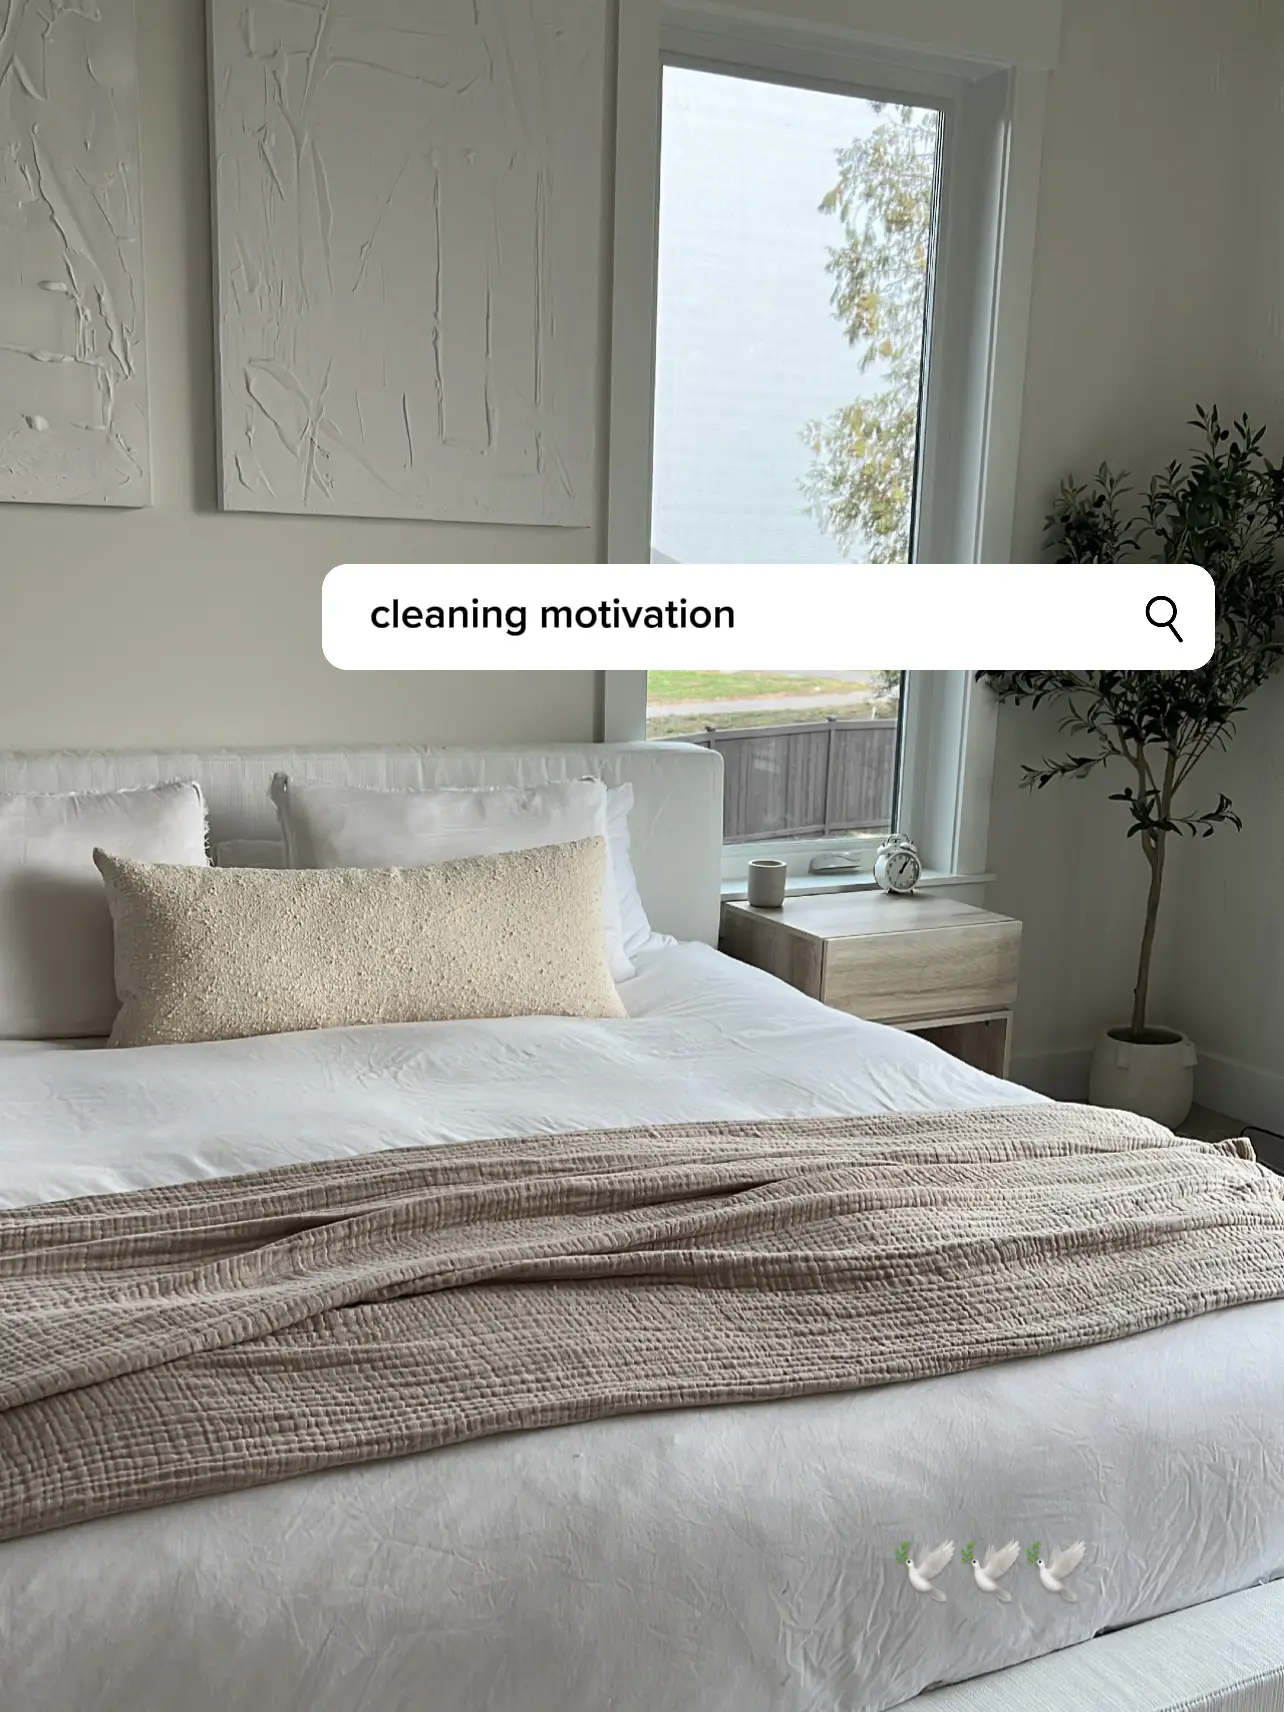 cleaning motivation 🫧, Video published by kaeli mae